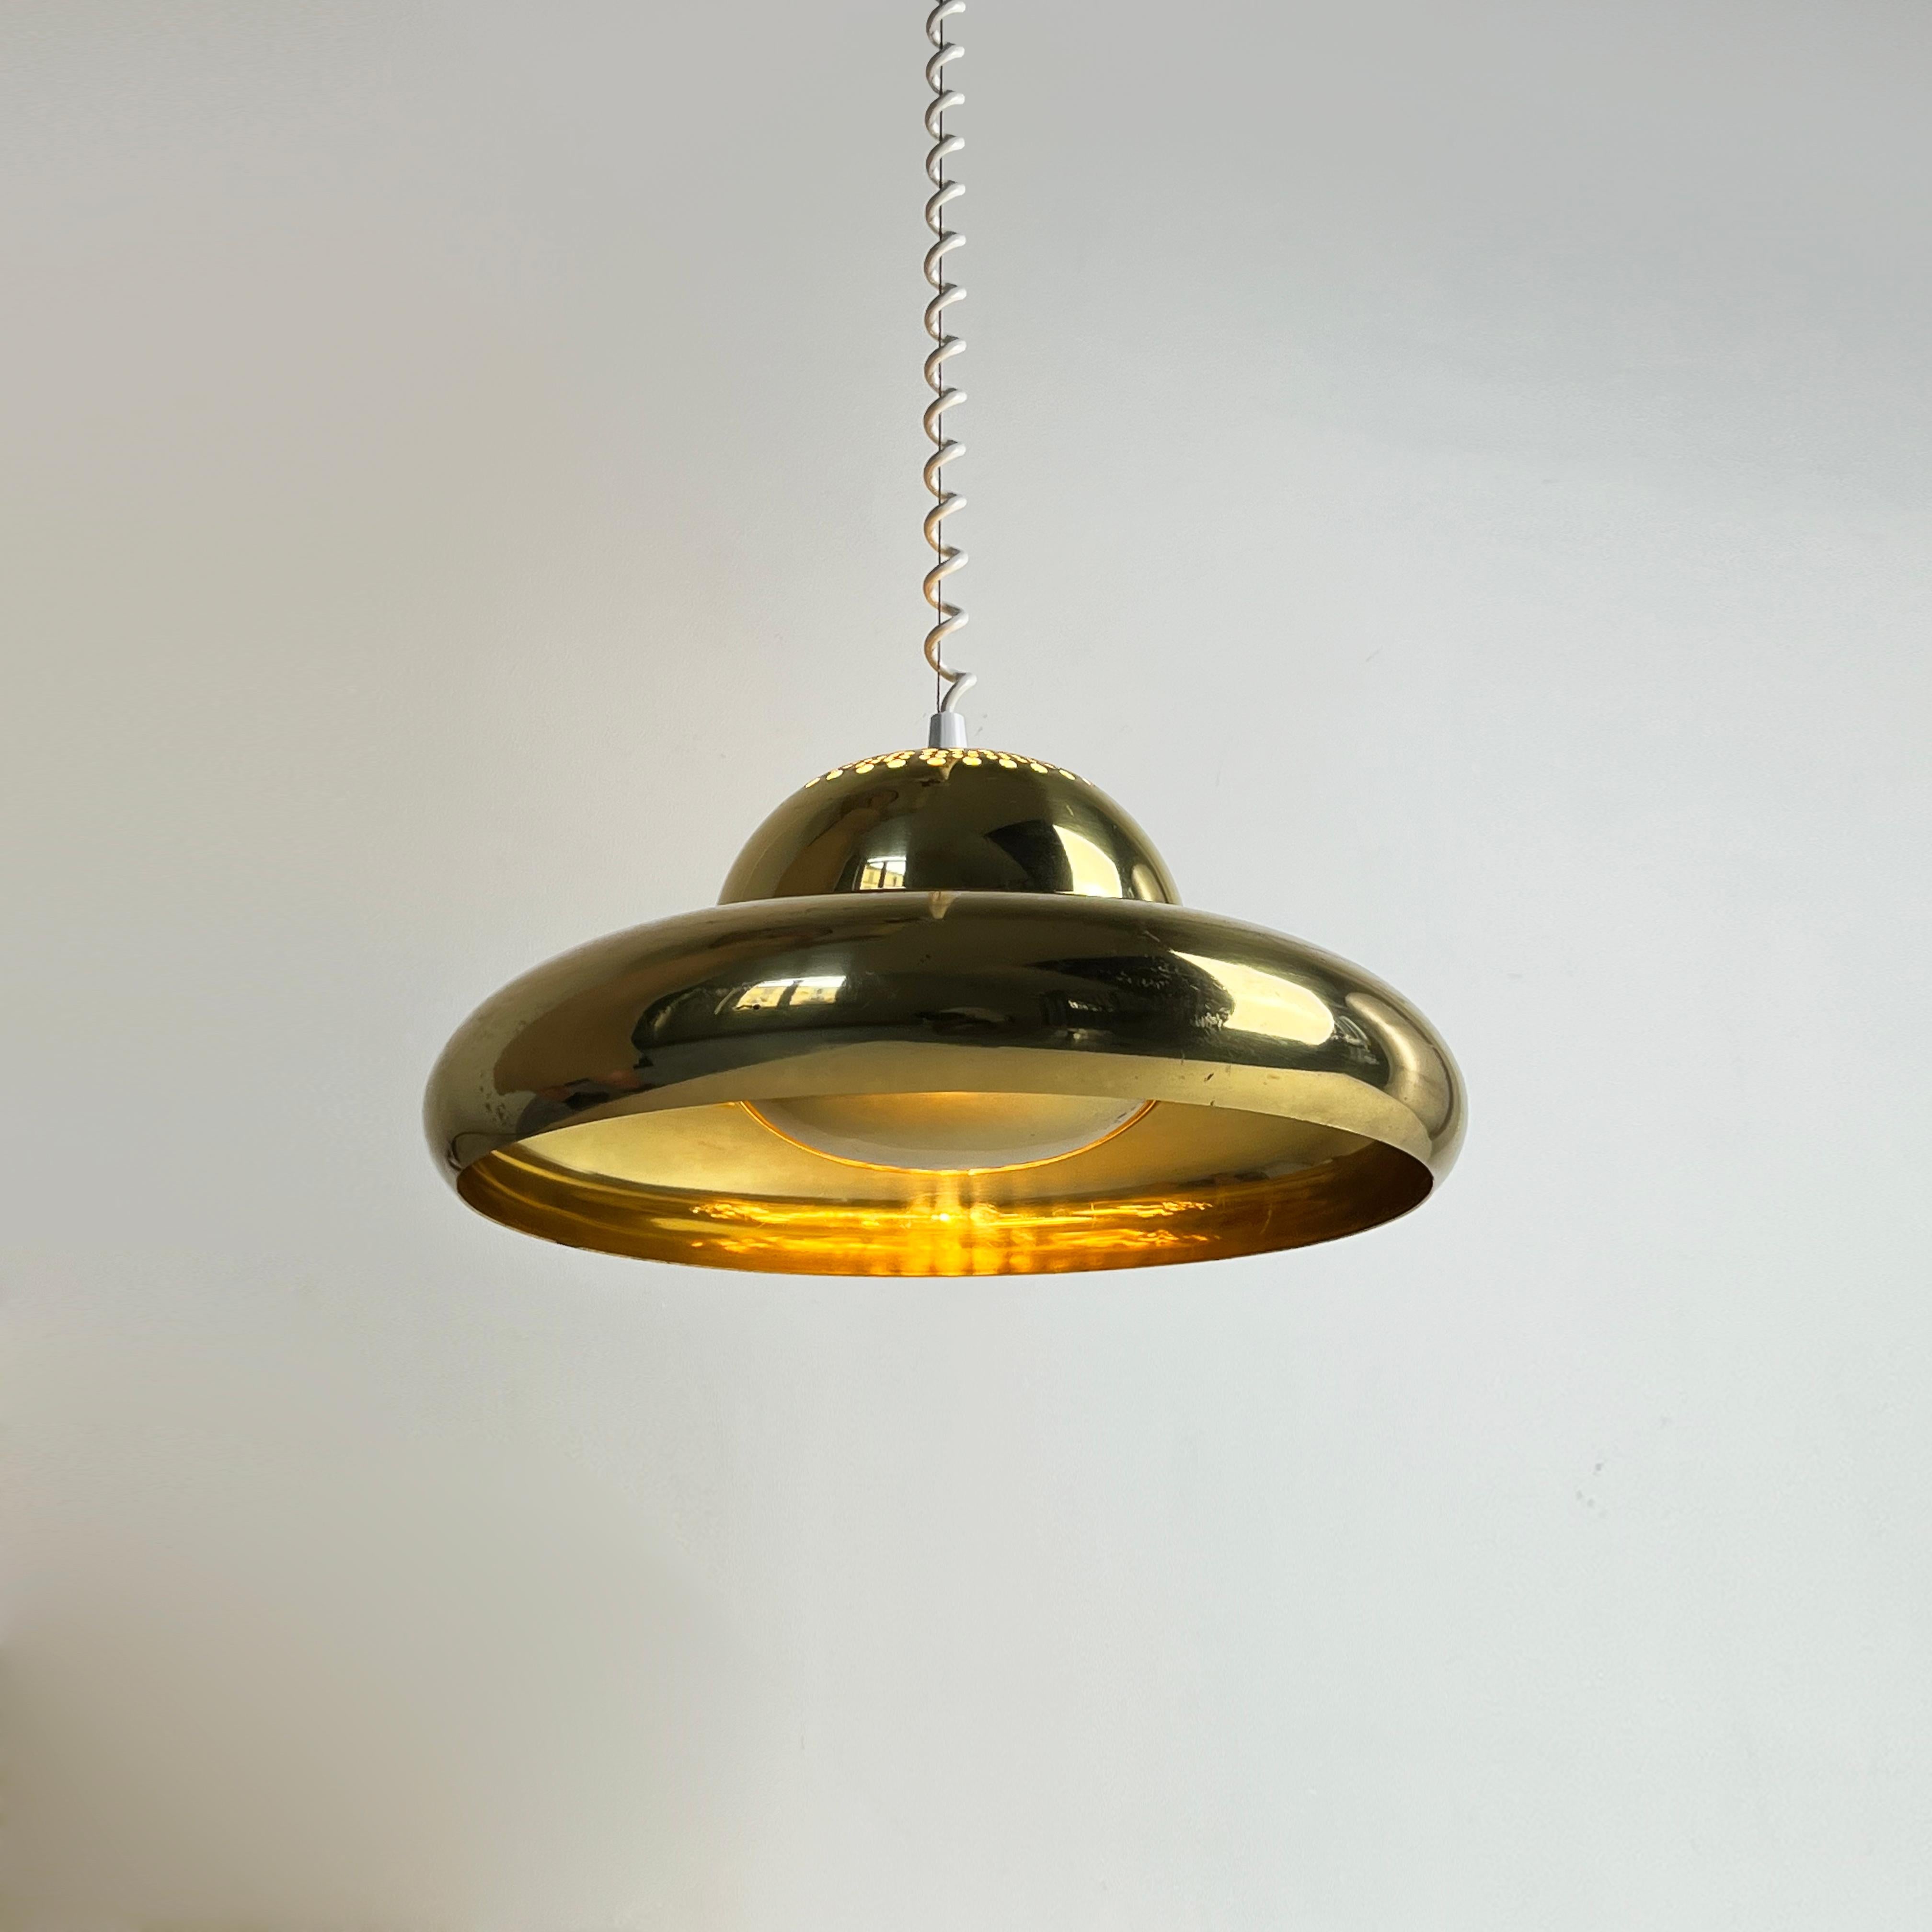 Brass Pendant Fior Di Loto by Afra and Tobia Scarpa for Flos, 1960s For Sale 5